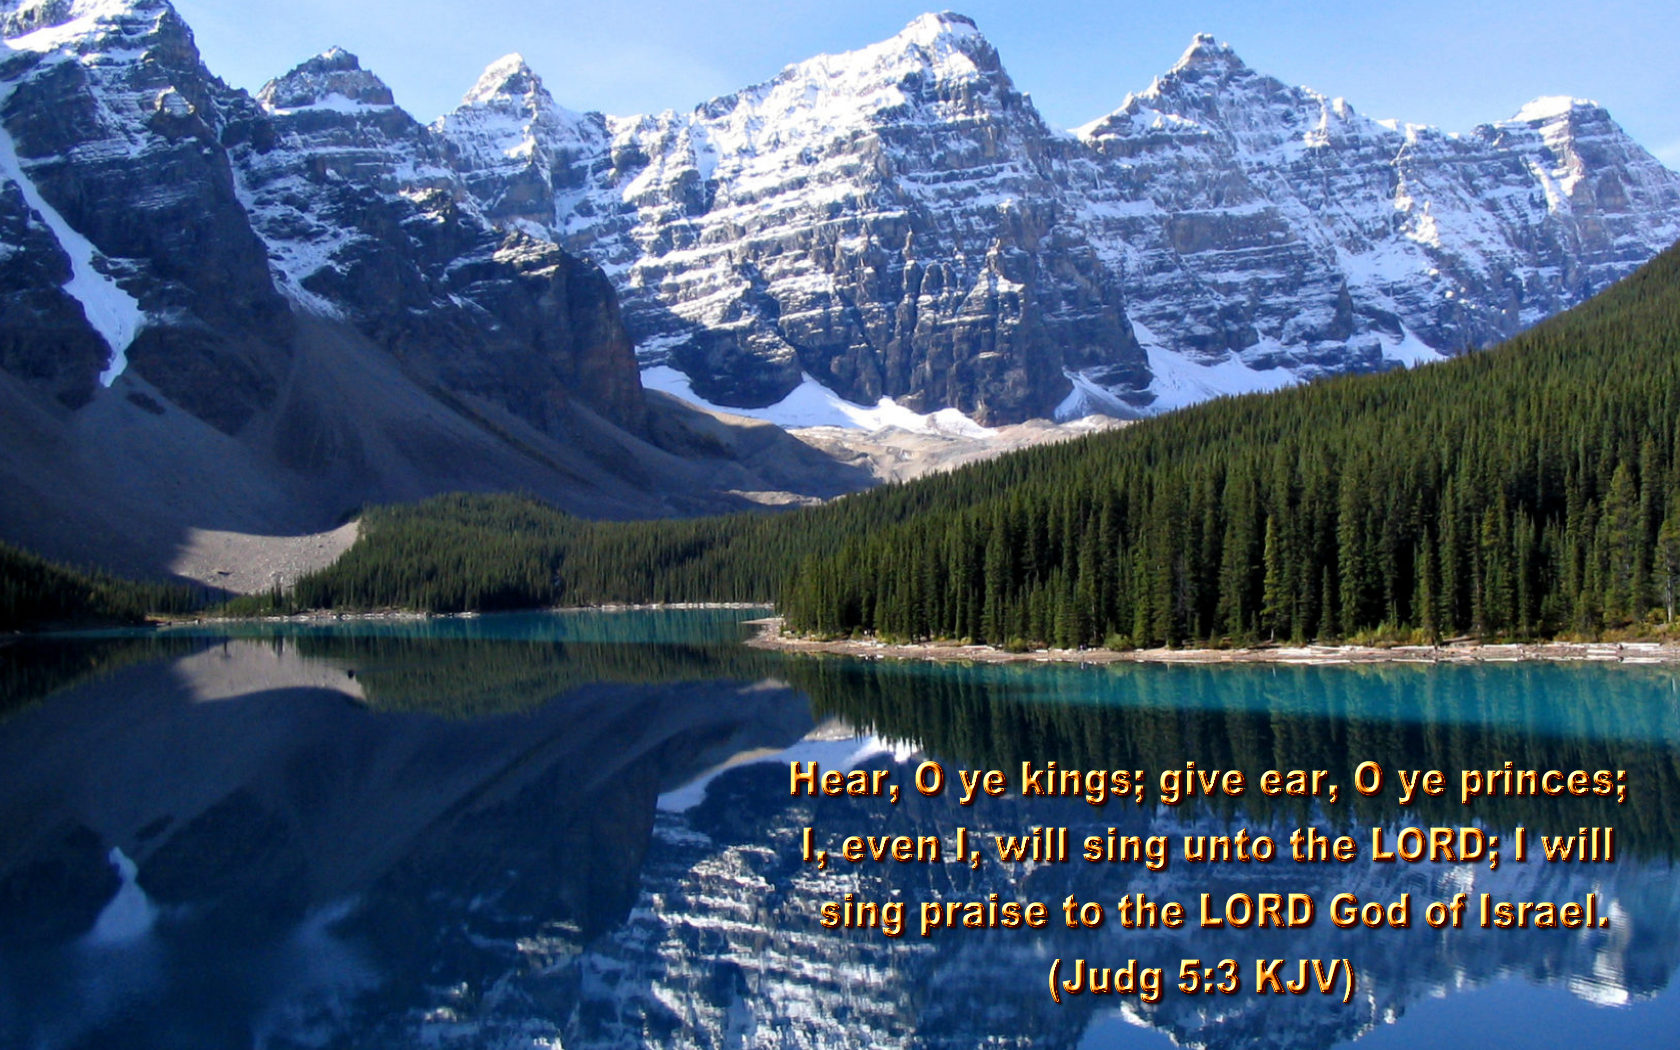 Click on image to see full size Bible verses large wallpaper